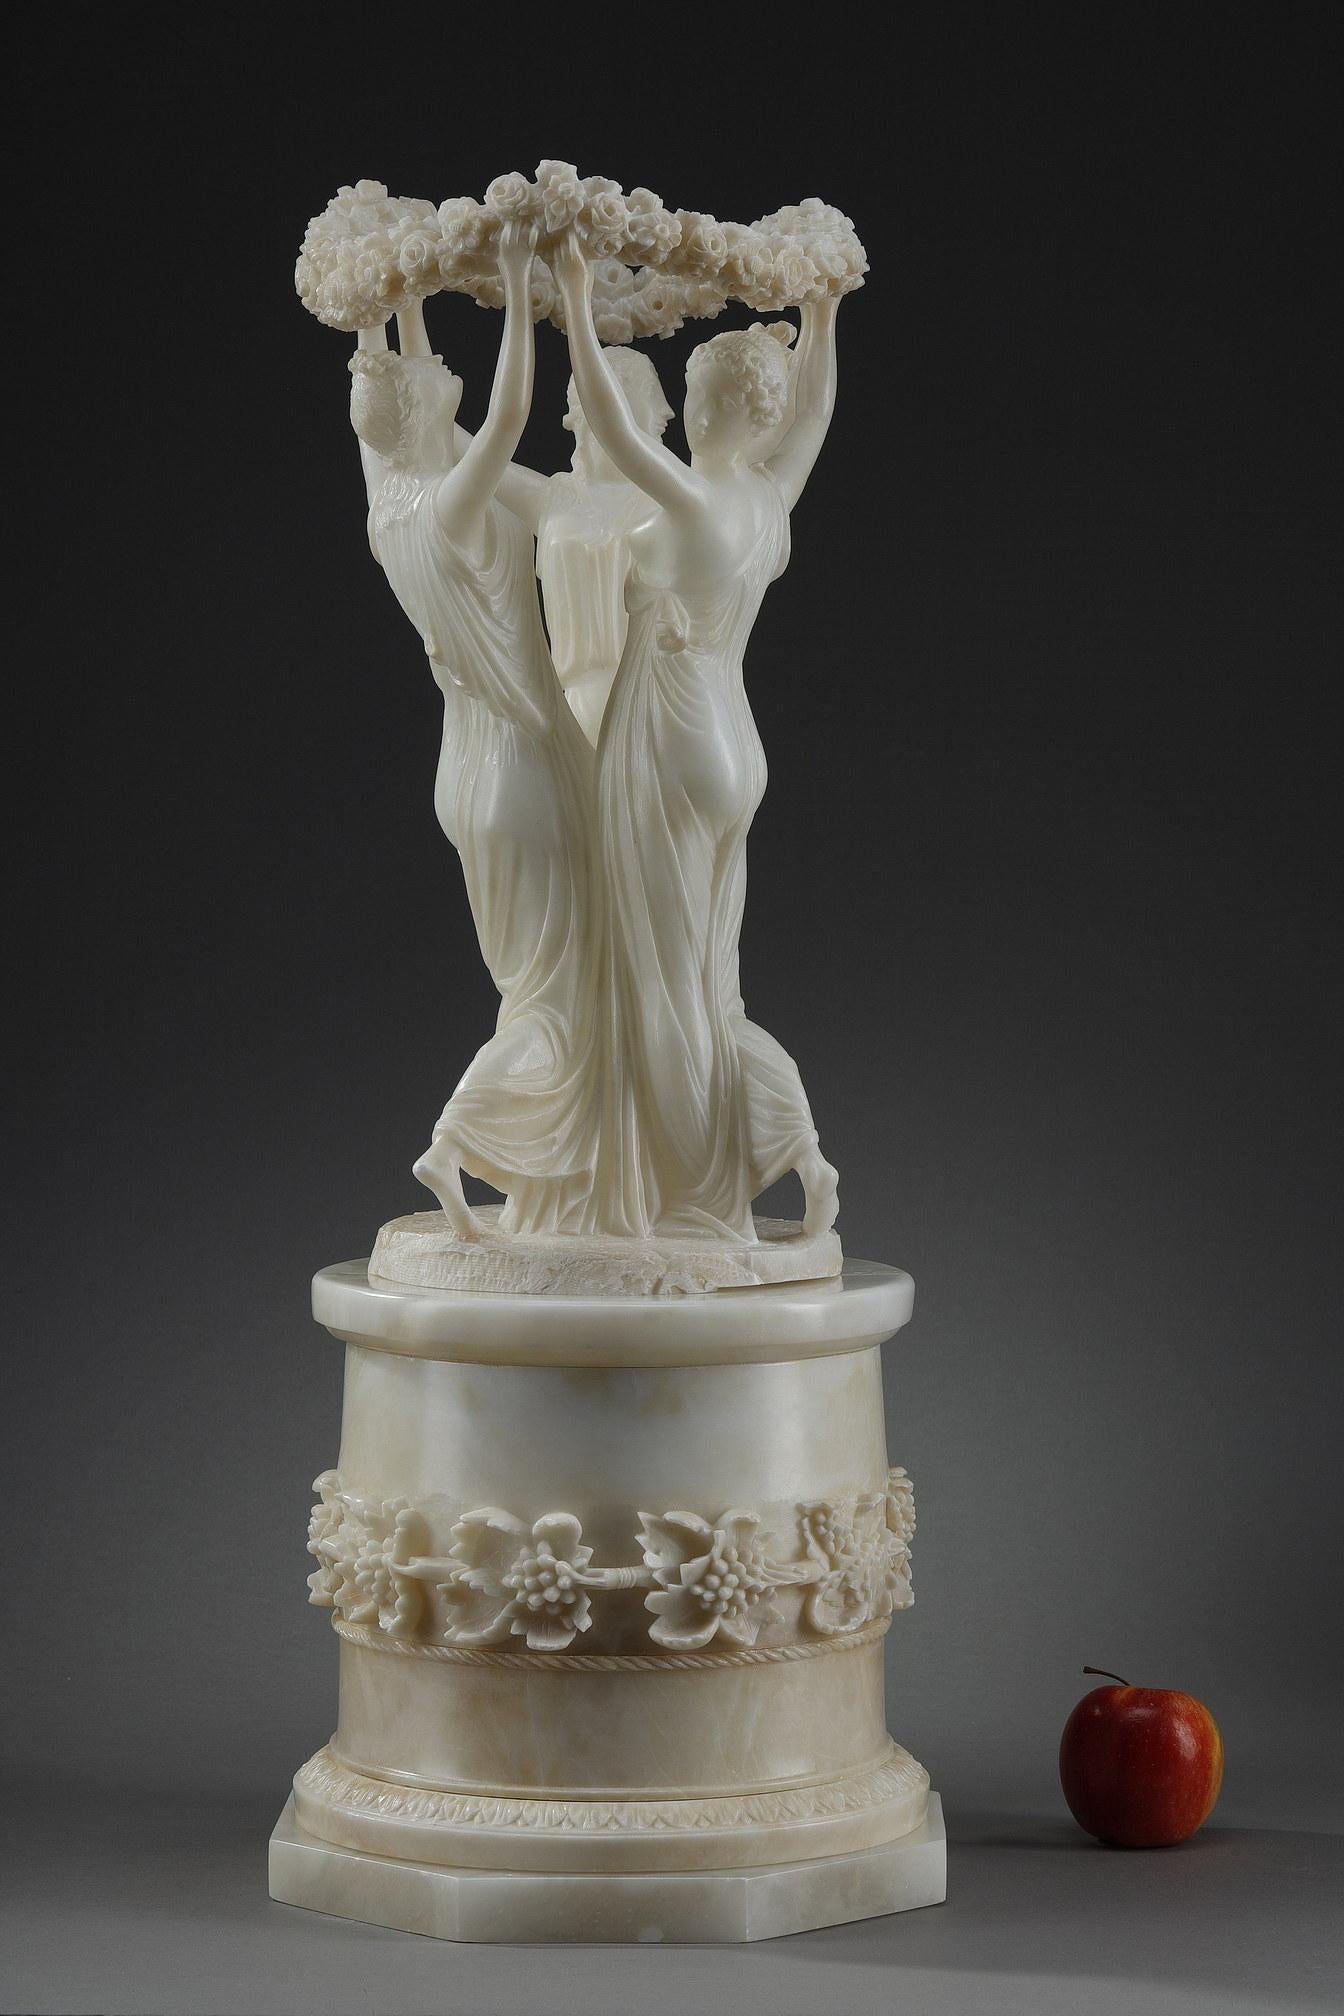 Alabaster sculpture representing the three Graces dancing in a circle and holding a crown of flowers. The three young women dressed in Grecian tunics are treated in an individualized manner. They stand on a high cylindrical pedestal decorated with